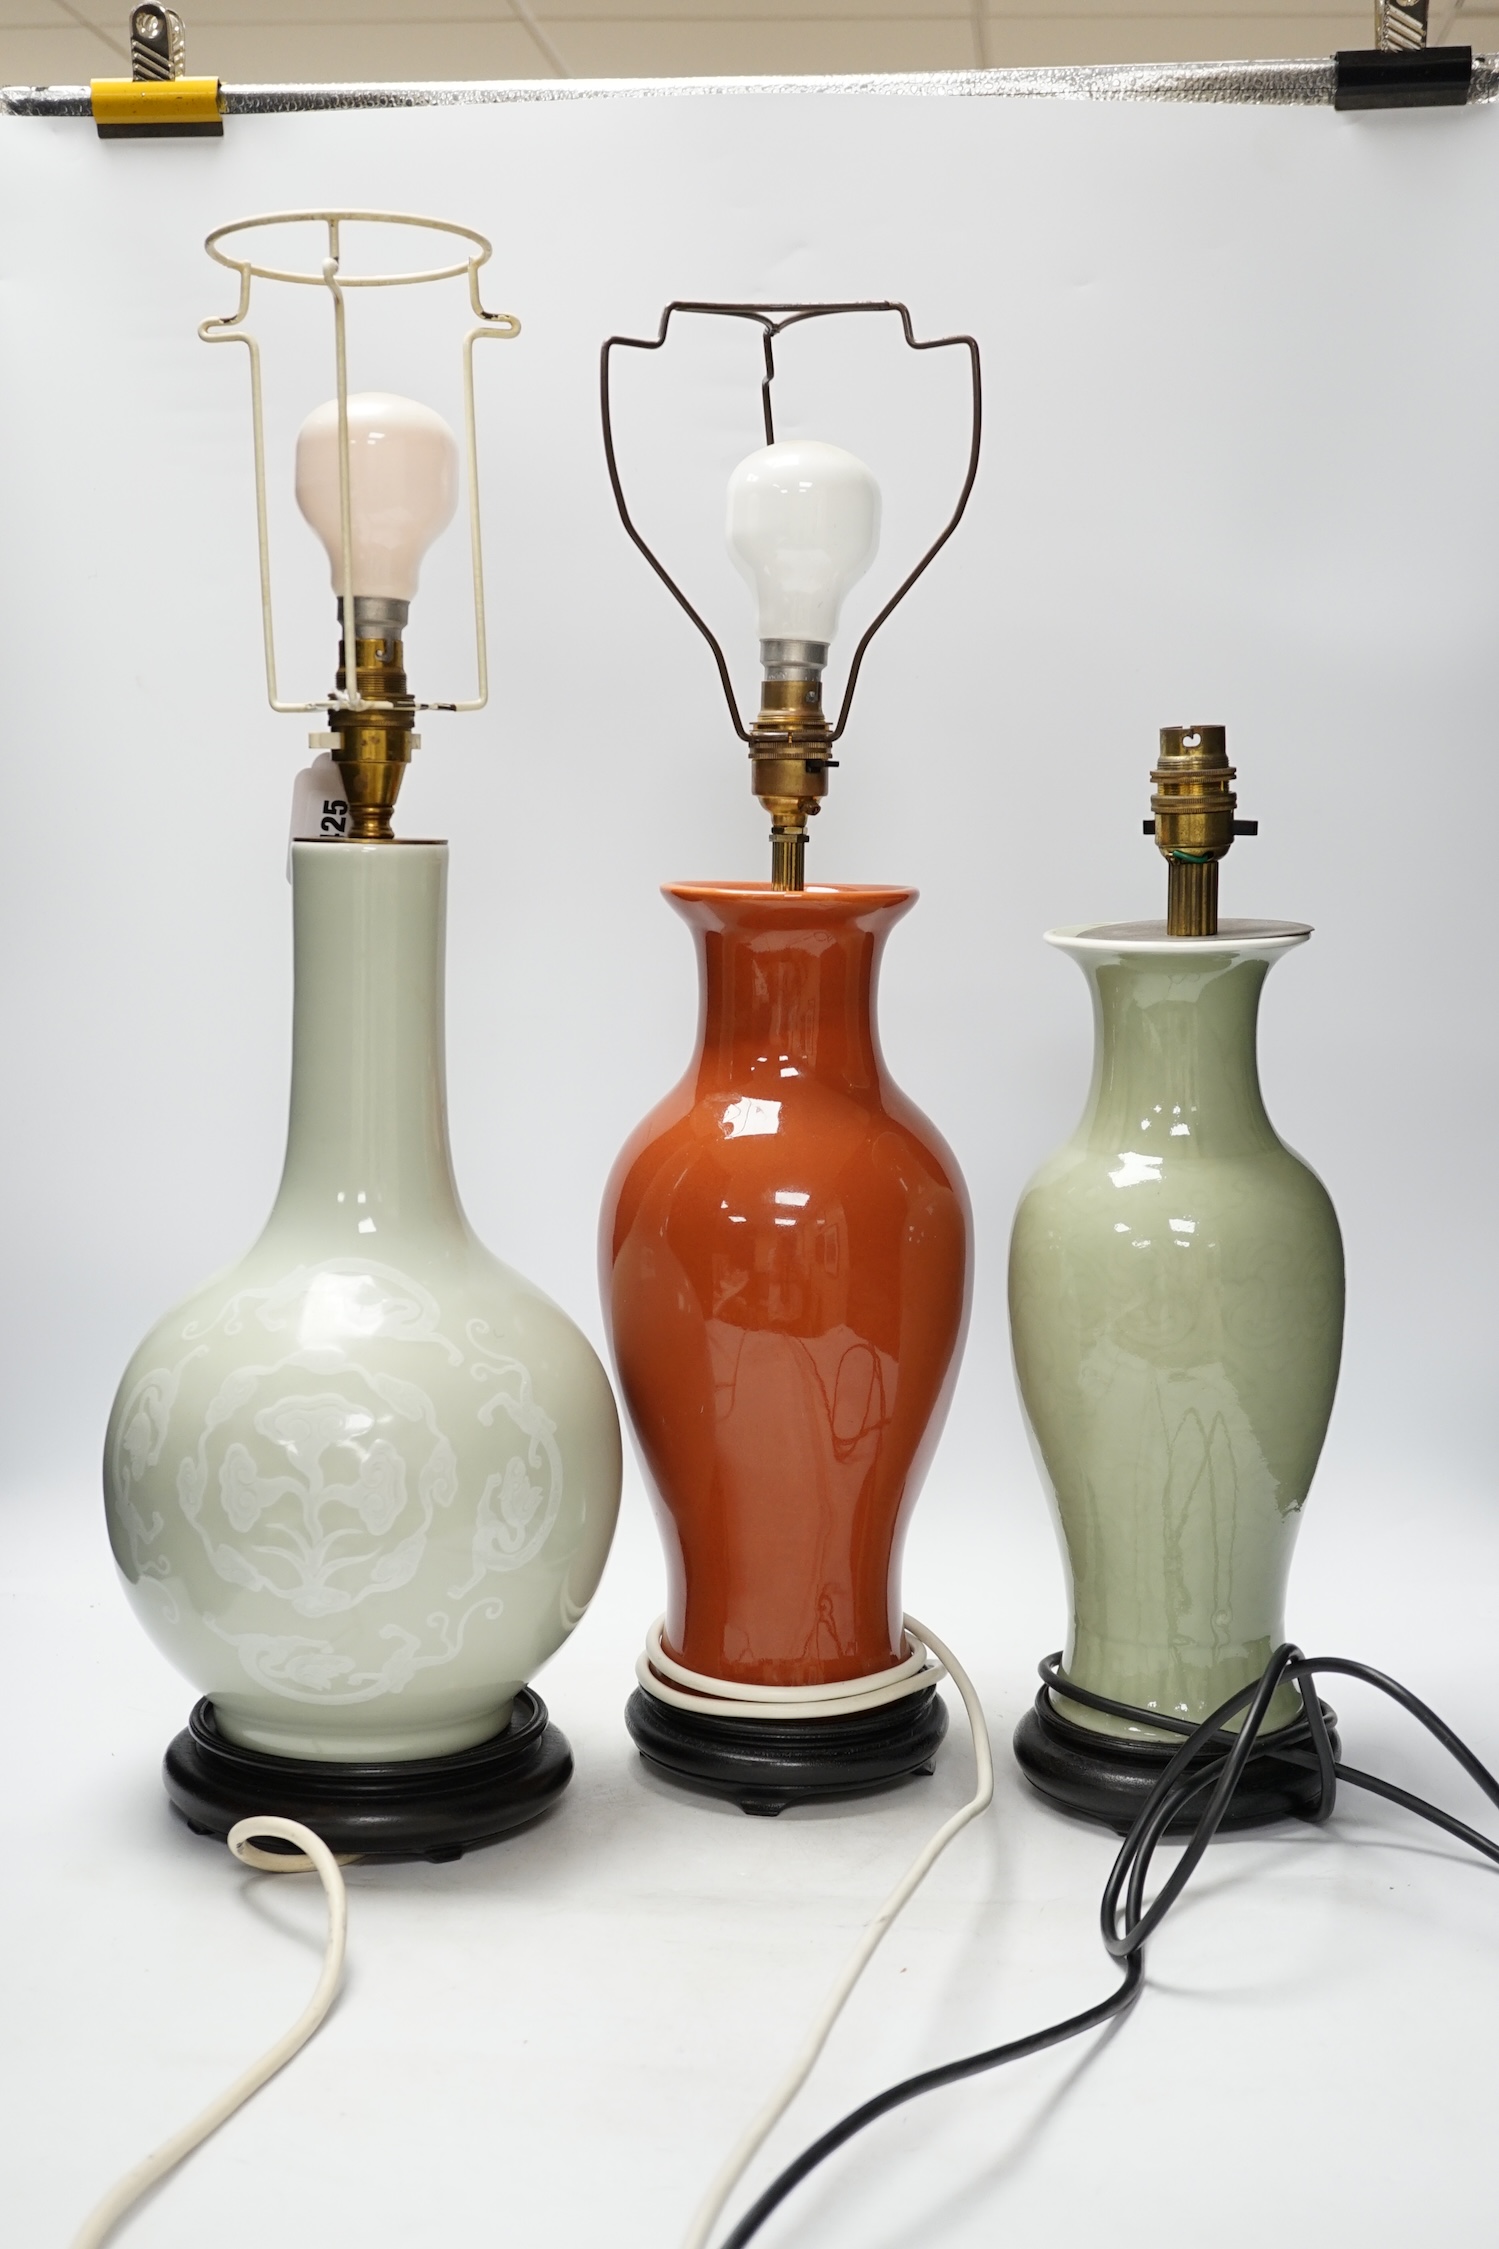 Three Chinese monochrome porcelain lamp bases, 20th century, tallest 38cm high